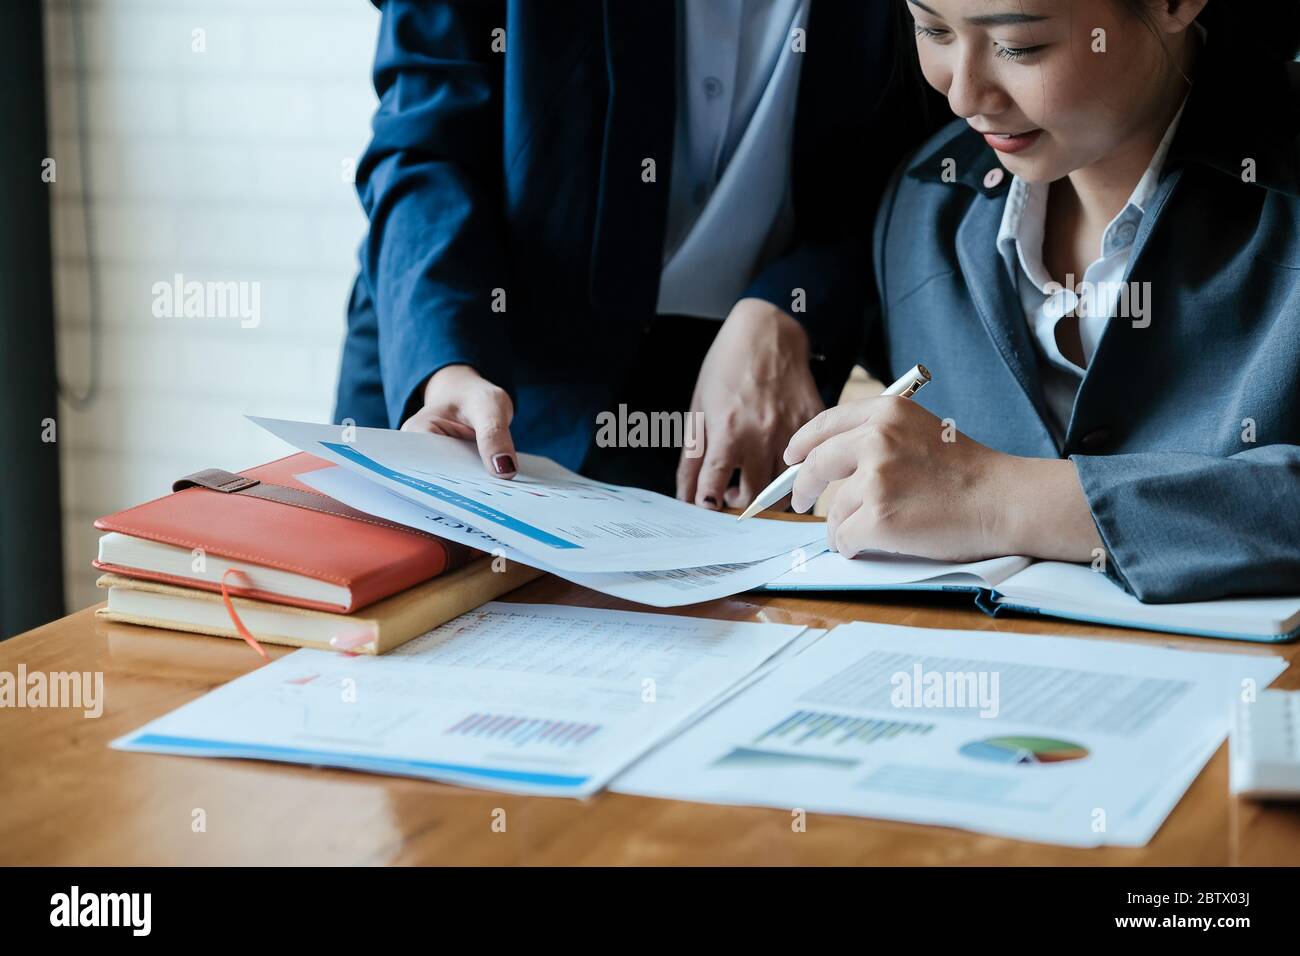 Close up of business people analyzing data from financial documents while working in the office Stock Photo